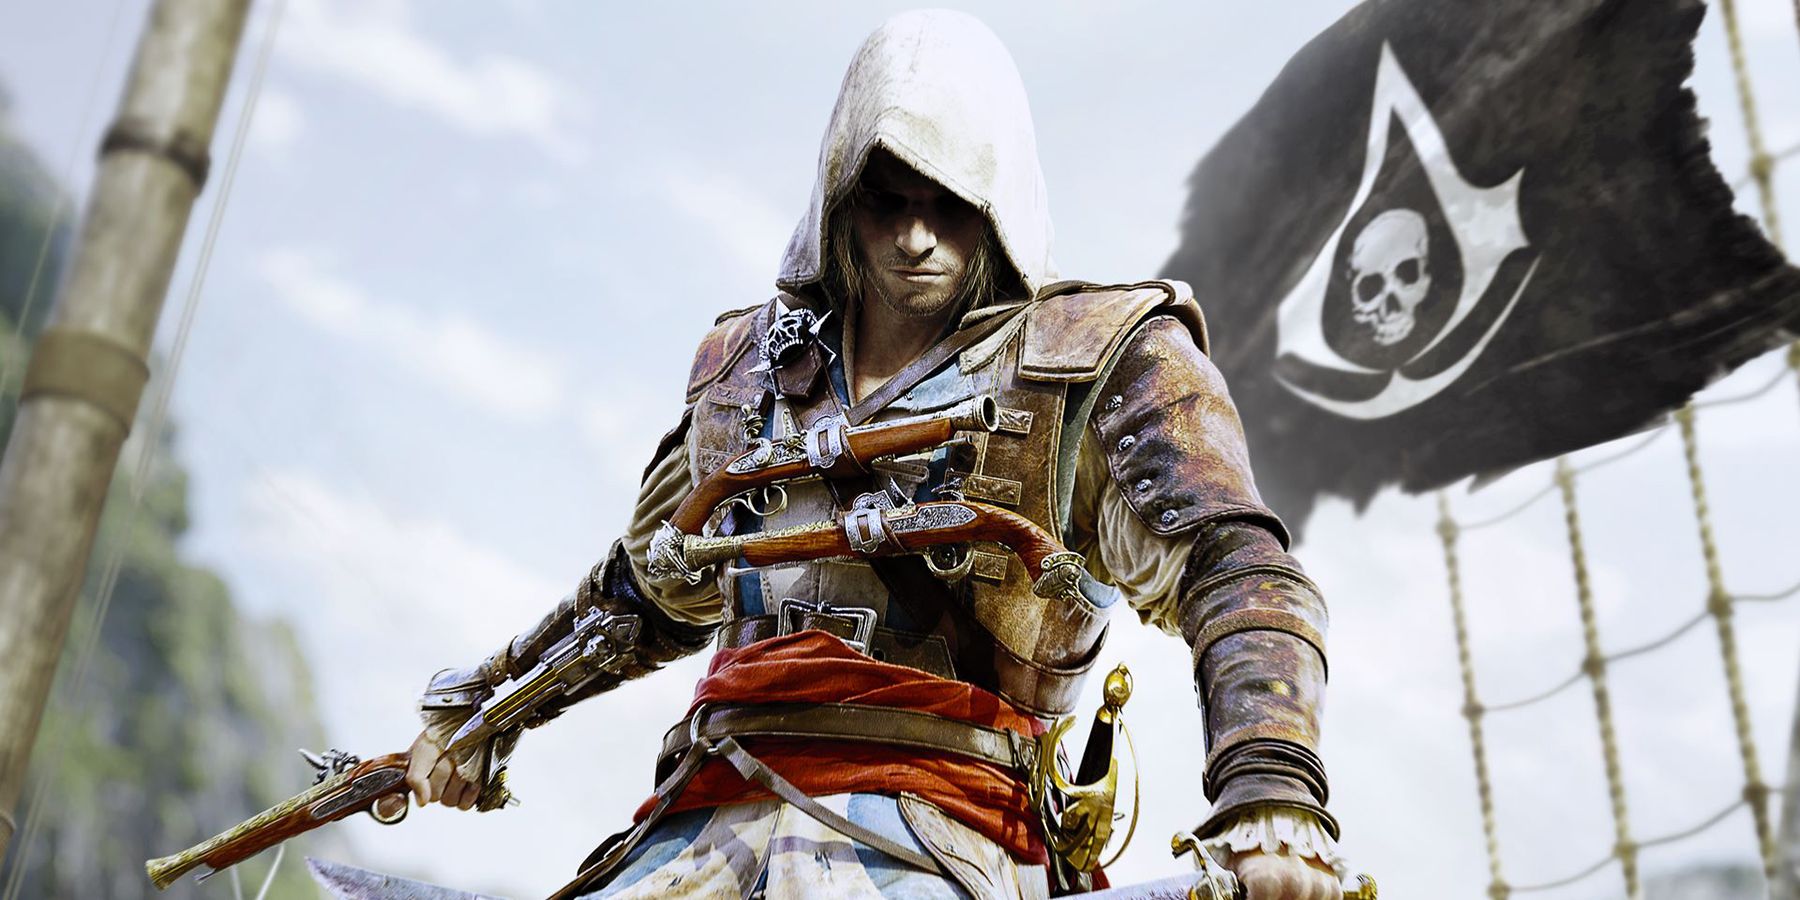 All The Assassins Creed Games Ranked Worst To Best (According To Metacritic)